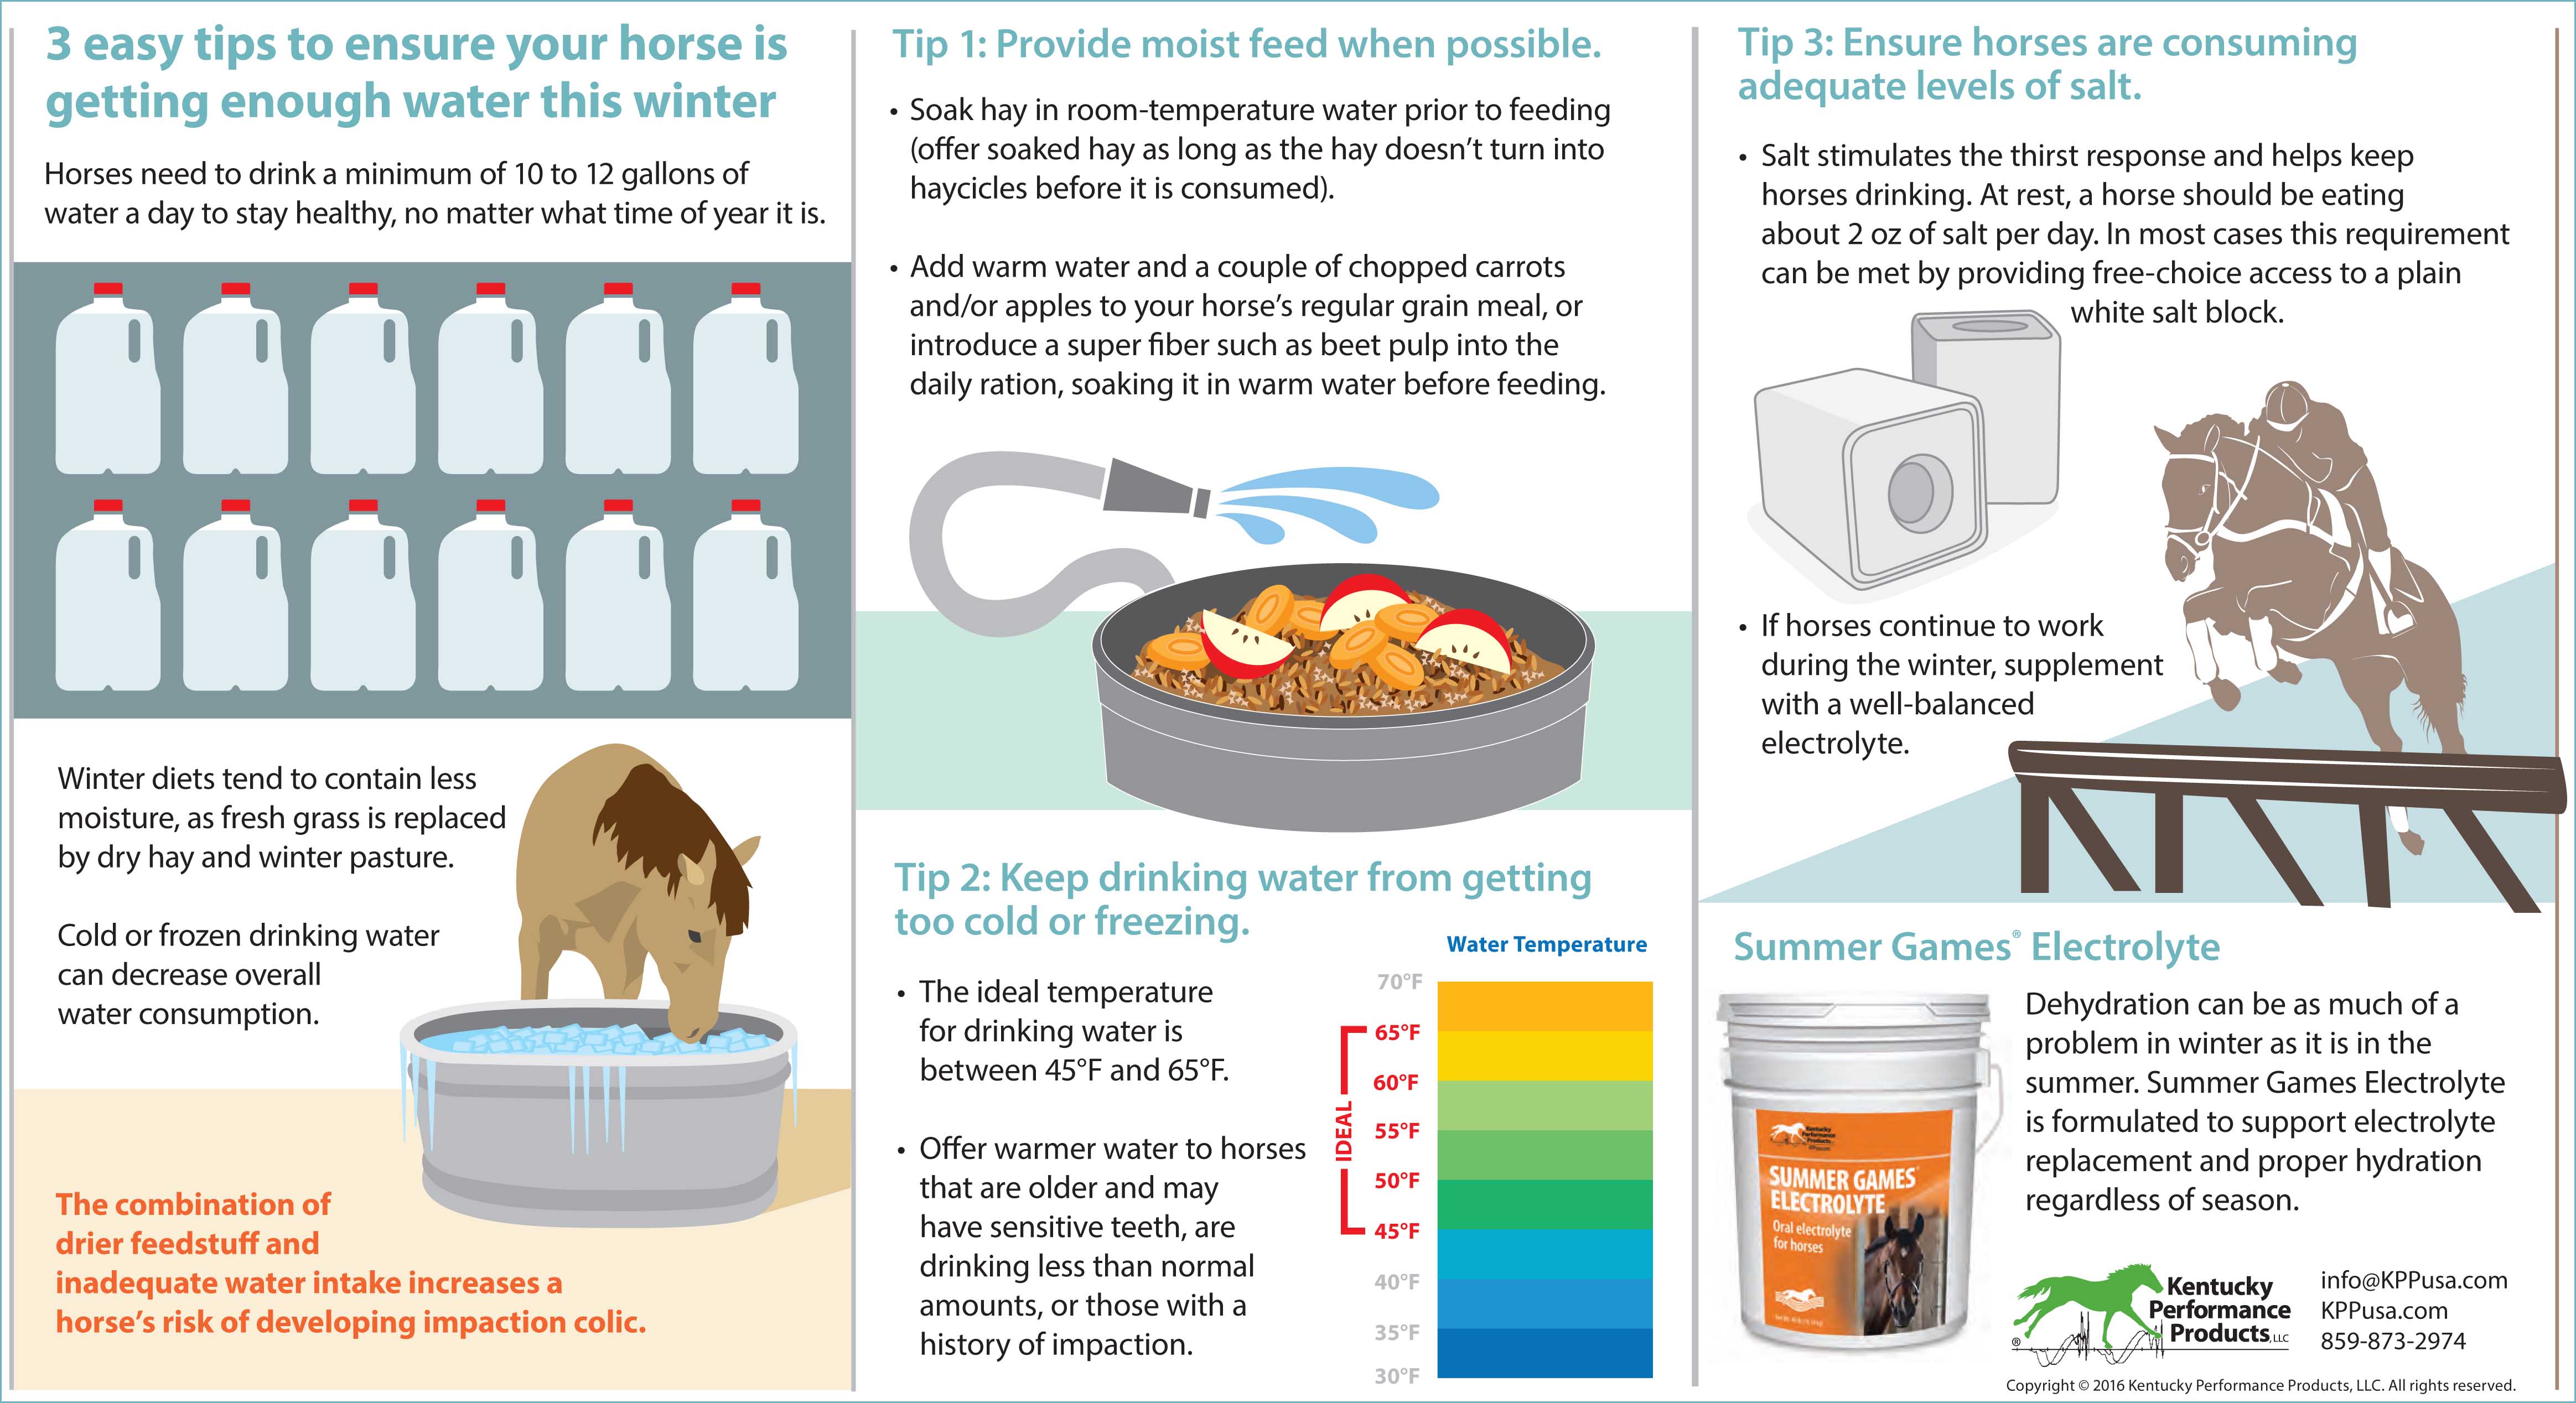 3-easy-tips-to-ensure-your-horse-is-getting-enough-water-this-winter-16-104dl